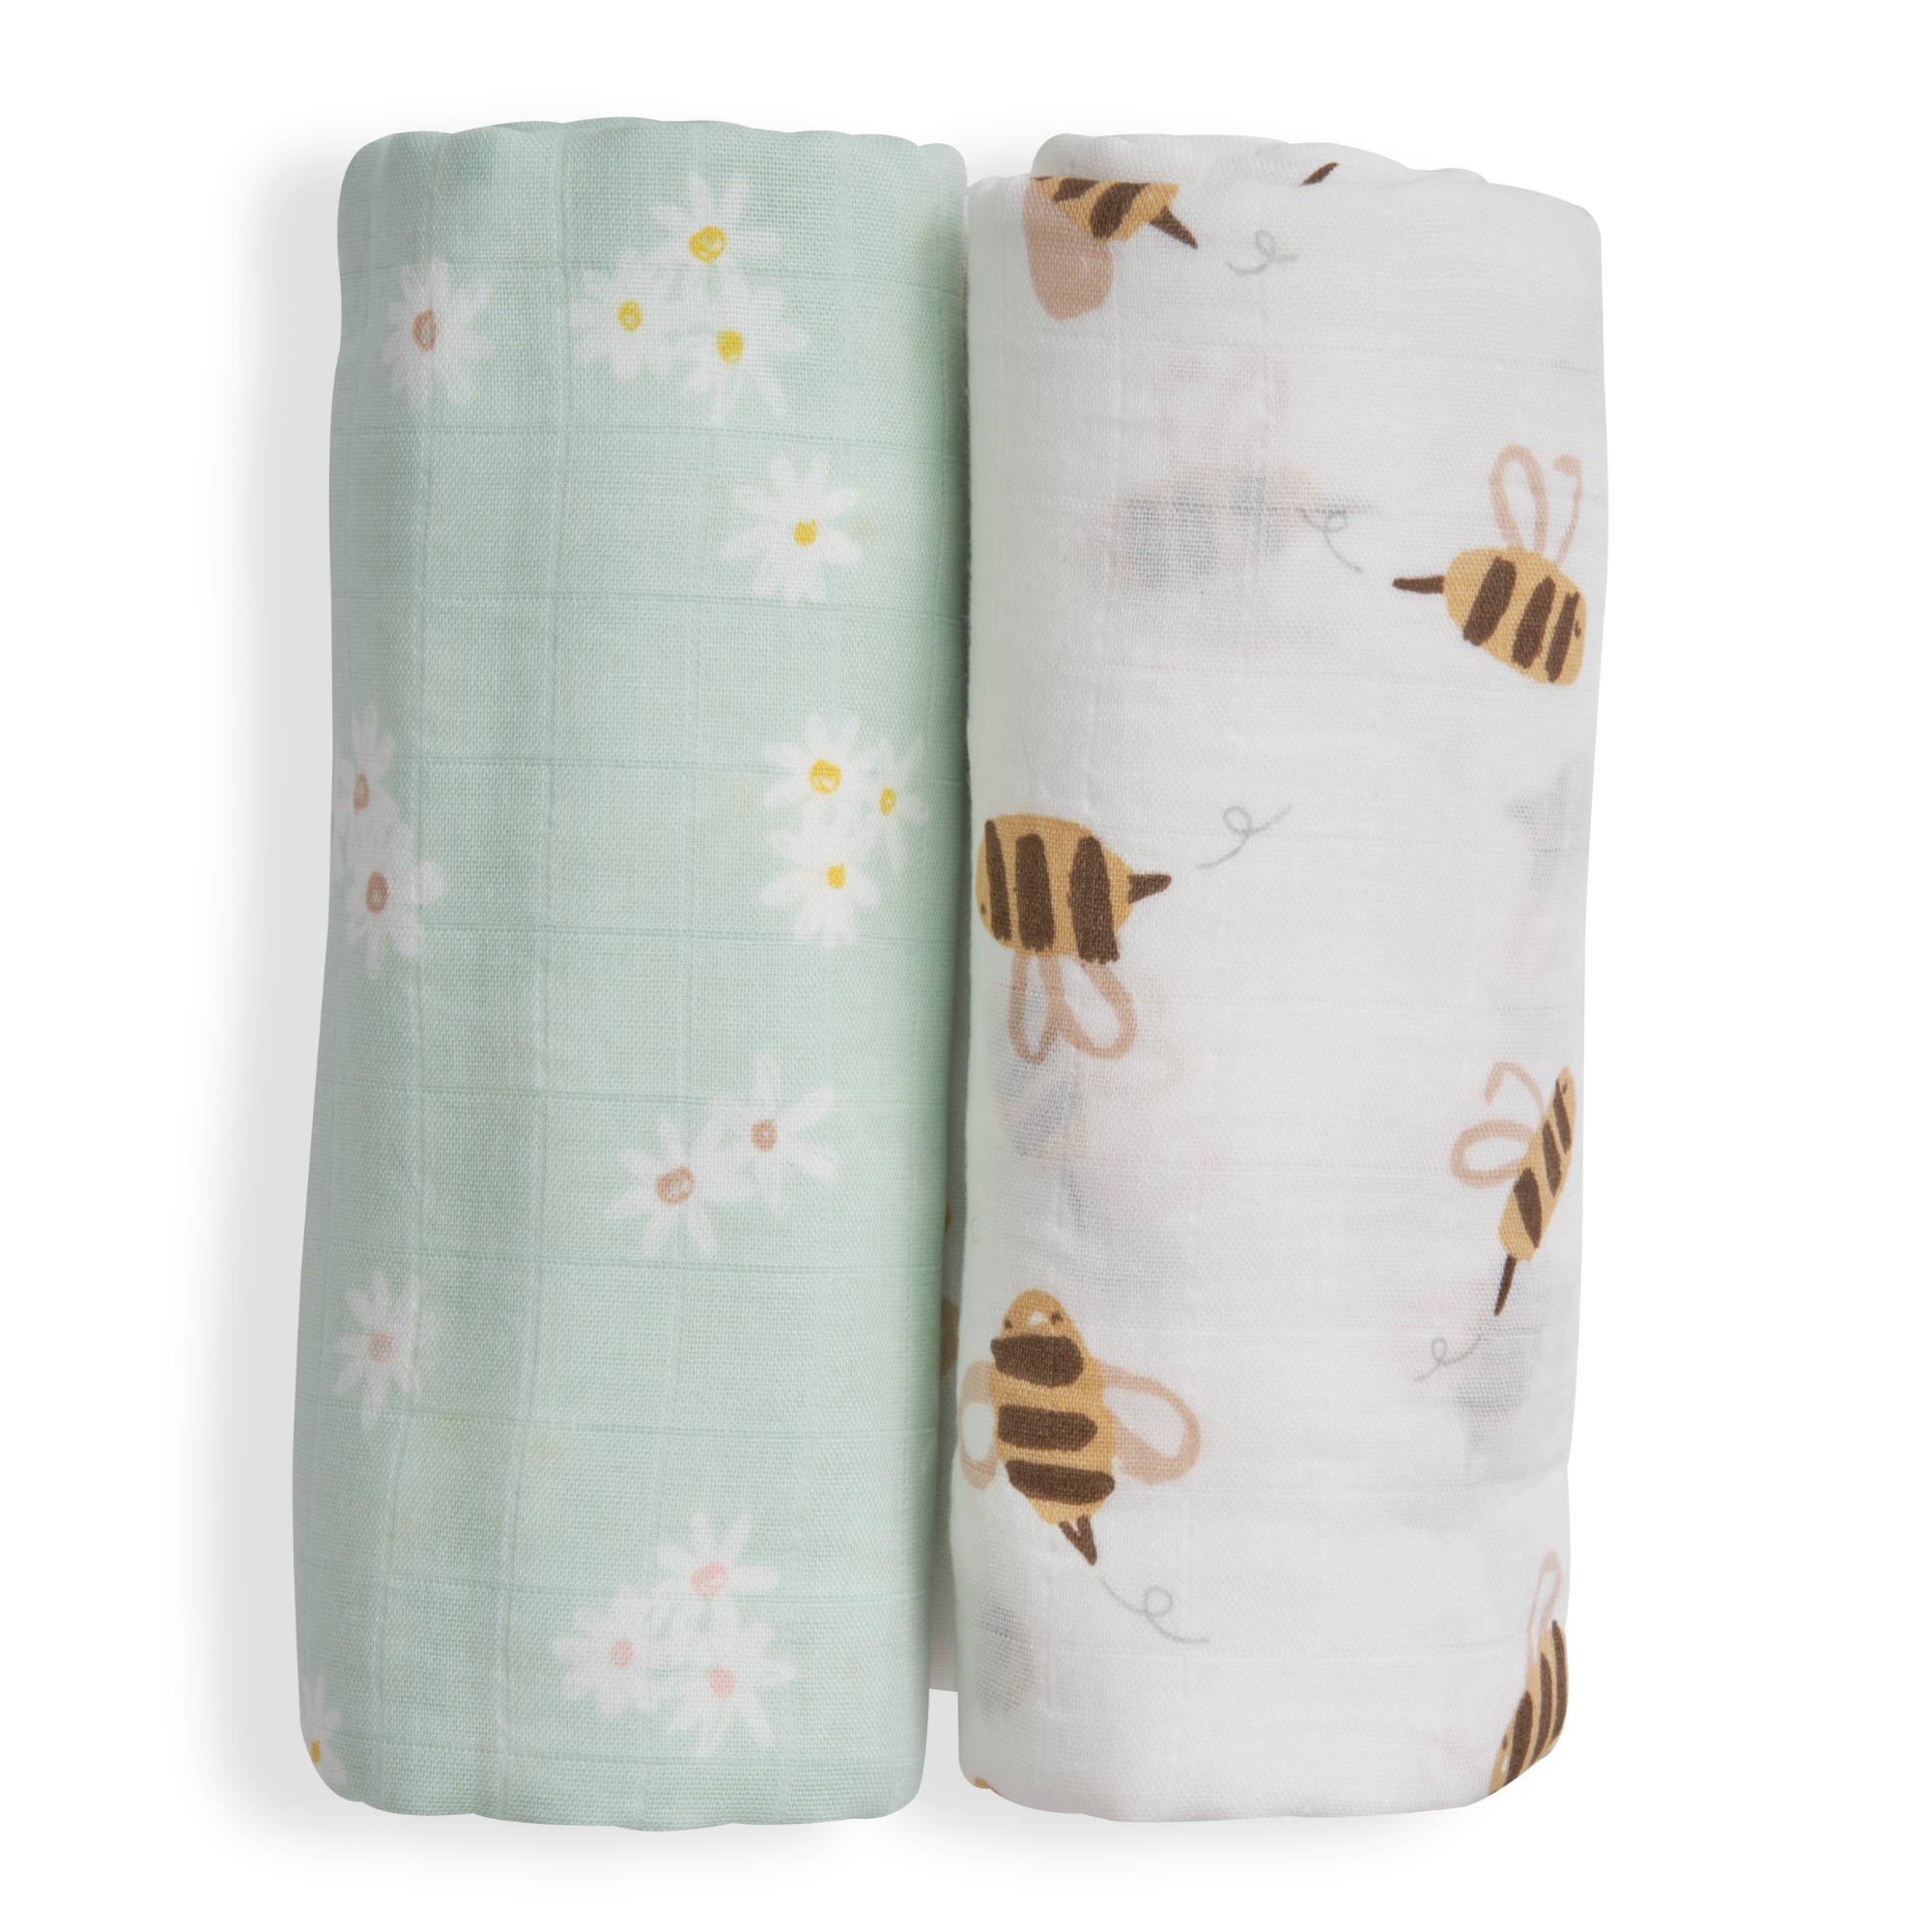 What Are Muslin Swaddle Blankets For Adults?